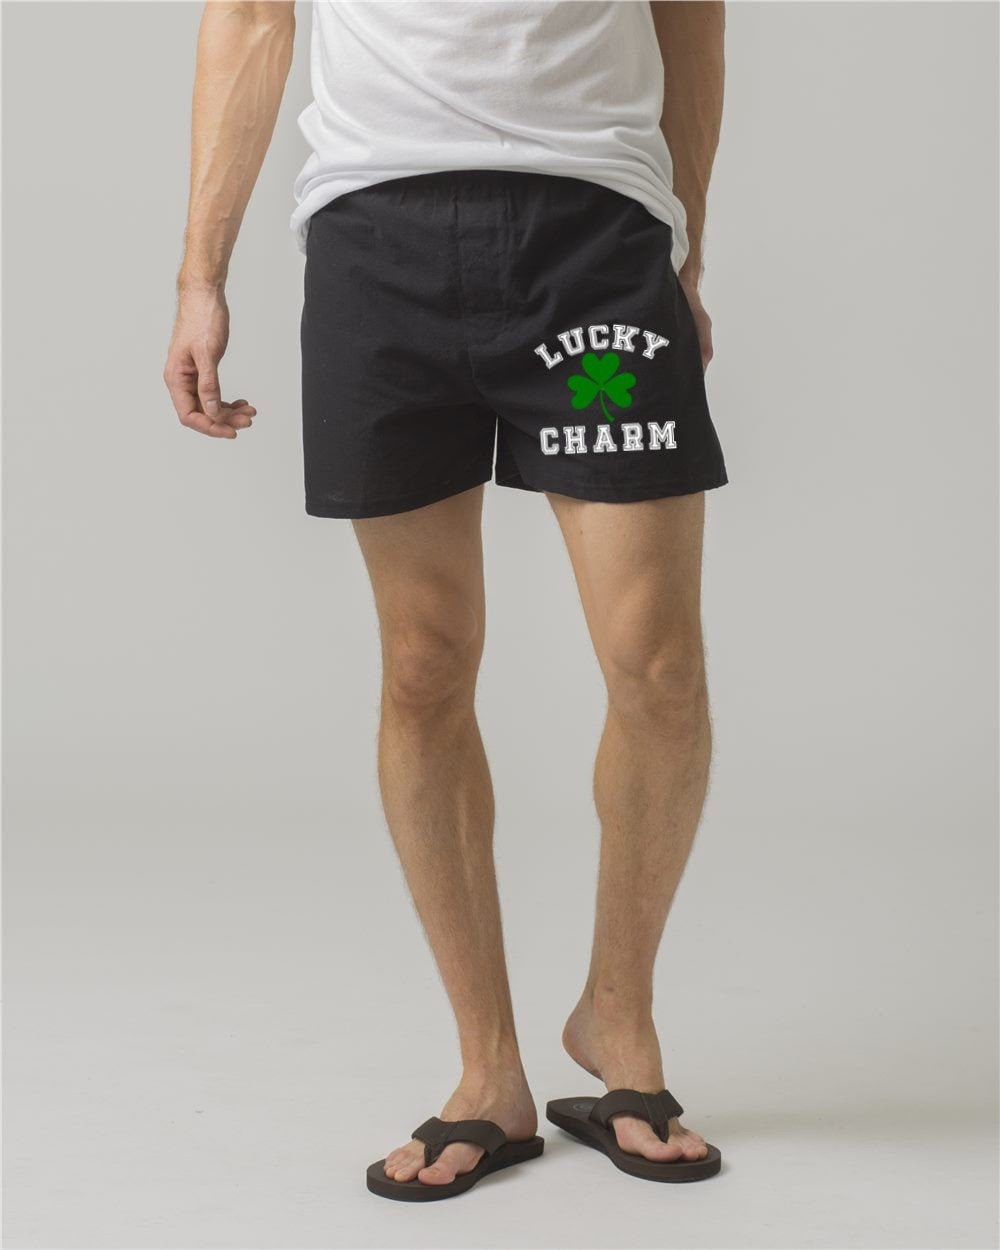 IMPROVED Lucky Charm Men's Super Soft Cotton Boxer Shorts - Gift for Him - Mens Boxers - Funny Boxers - Naughty Boxers